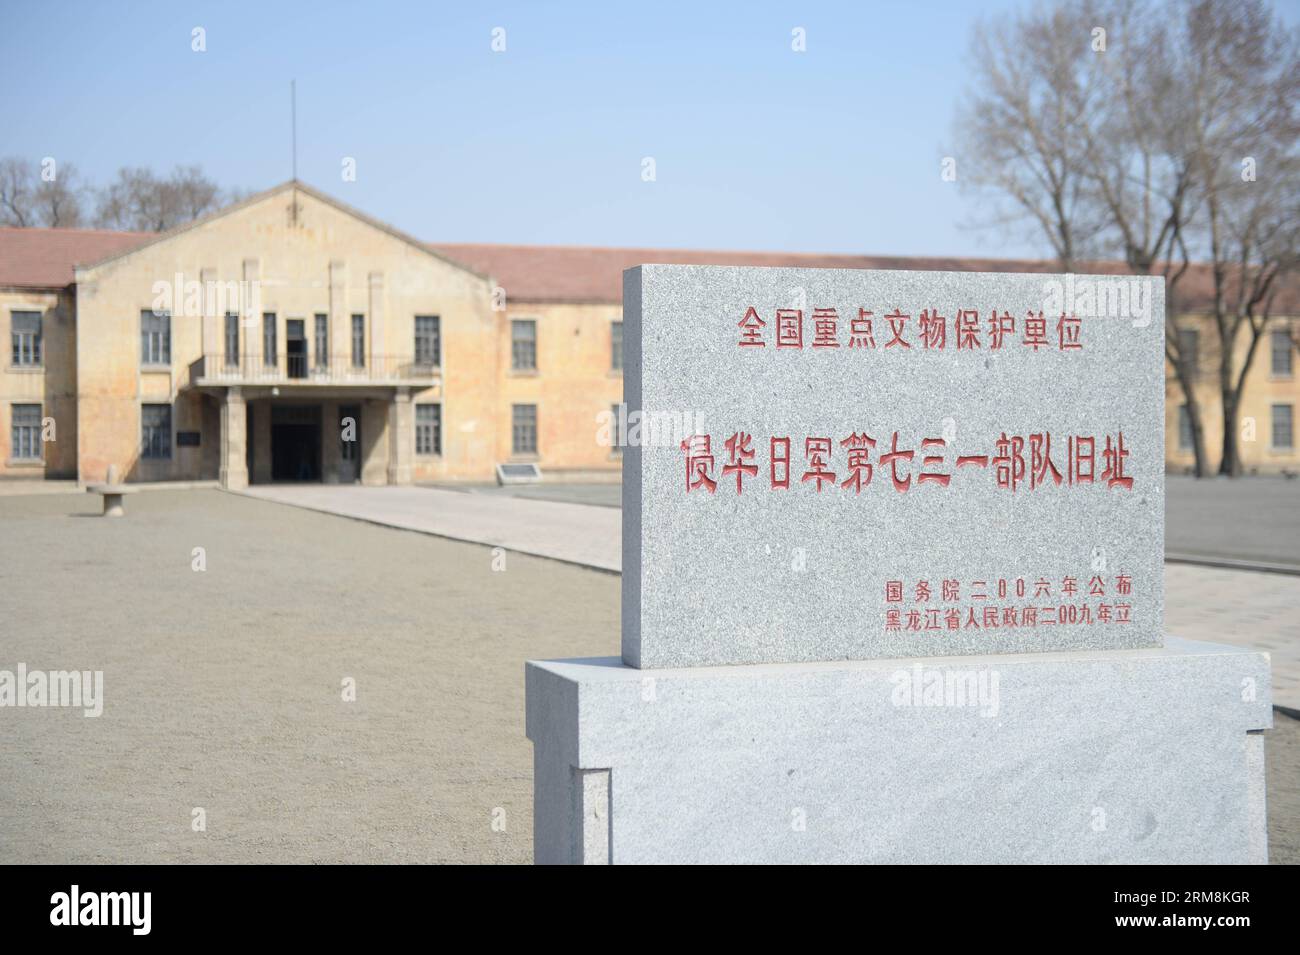 (140418) -- HARBIN, April 18, 2014 (Xinhua) -- Photo taken on April 18, 2014 shows the site of the Unit 731 headquarter in Harbin, capital of northeast China s Heilongjiang Province. Unit 731 was a Harbin-based biological and chemical warfare research unit of the Japanese army during WWII. The Unit 731 facility ruins in Harbin are evidences of the wartime atrocities committed by Japanese invaders in China. Unit 731 members conducted a series of human experiments which subjected victims to vivisections, germ war attacks, weapon tests and other forms of torture. April 18 is the International Day Stock Photo